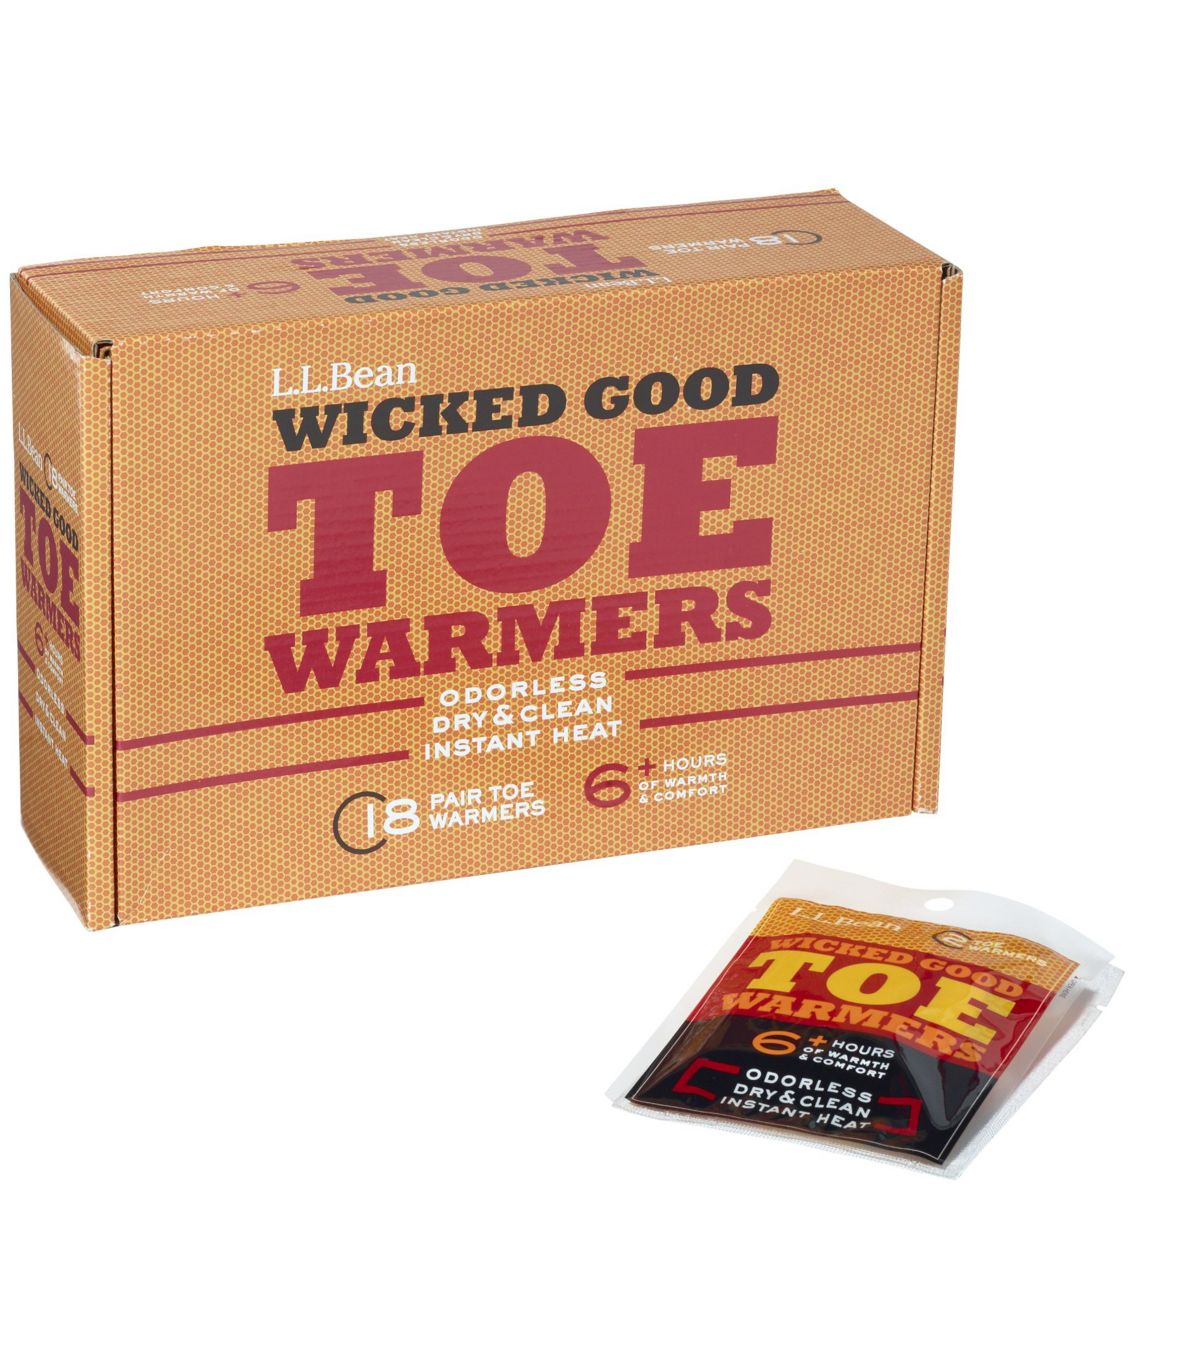 Wicked Good Toe Warmers, Pack of 18 Pairs